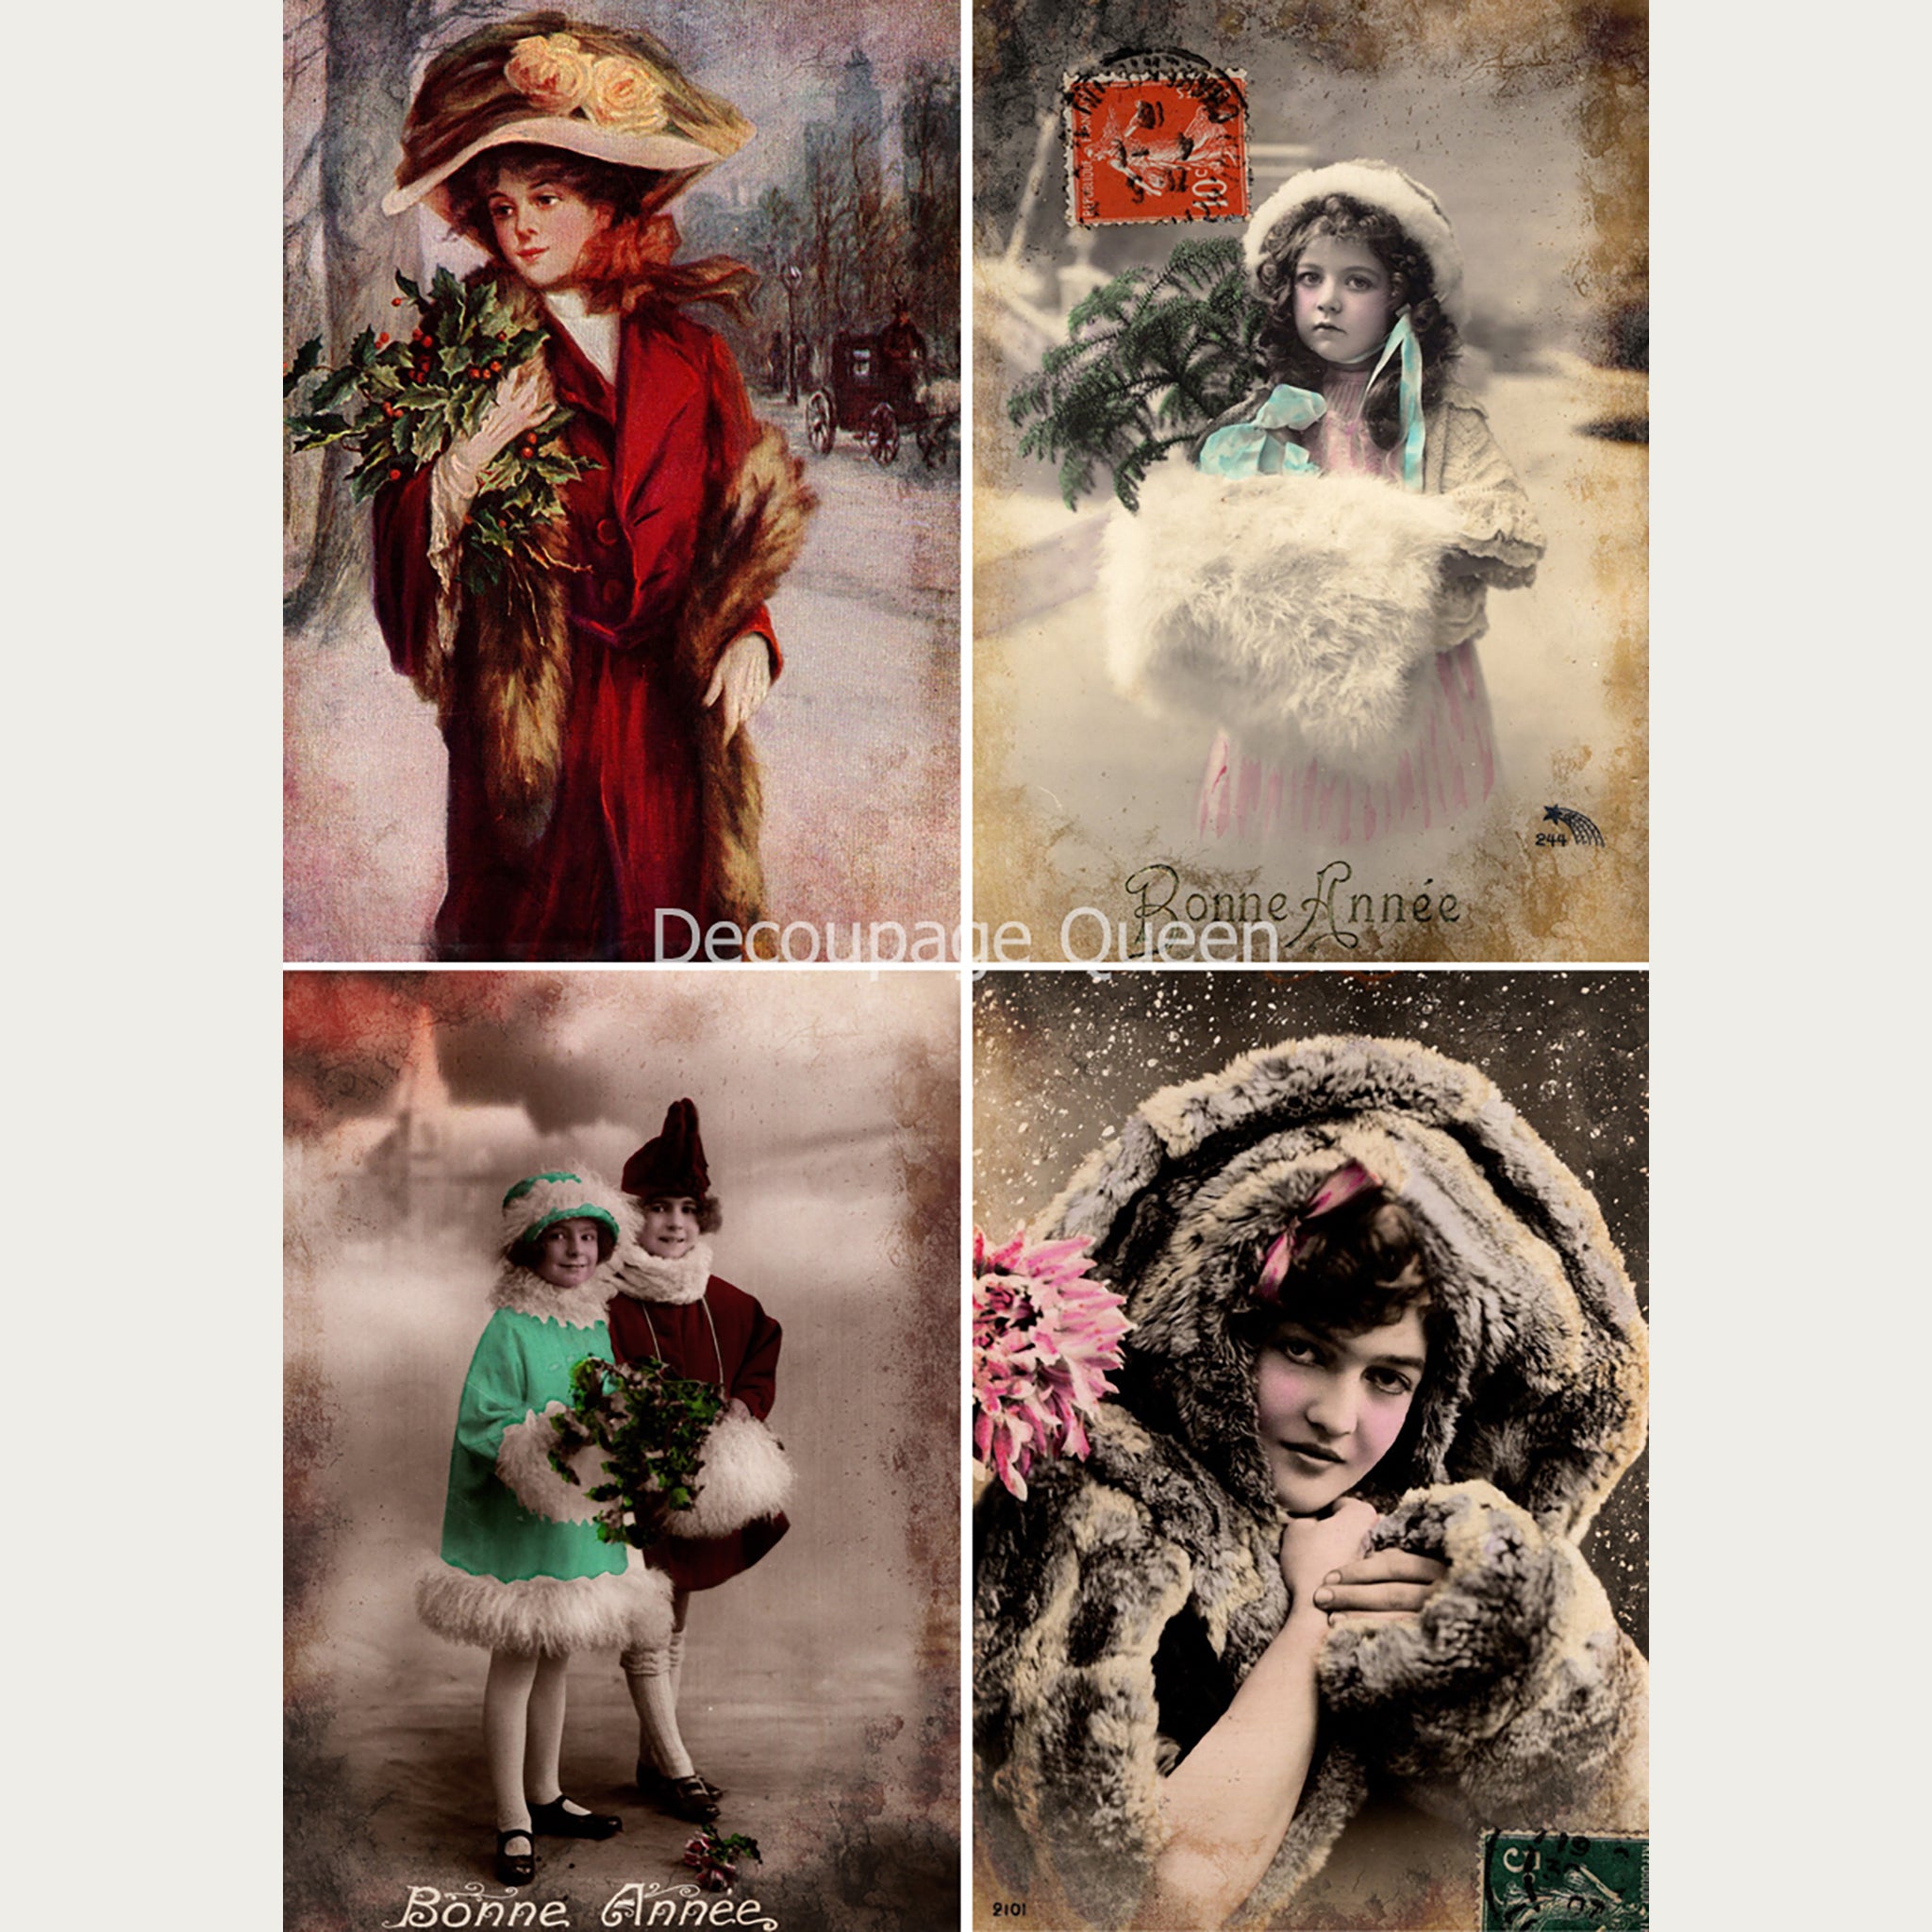 Four A3 rice paper designs of vintage women and girls dressed in winter outfits.